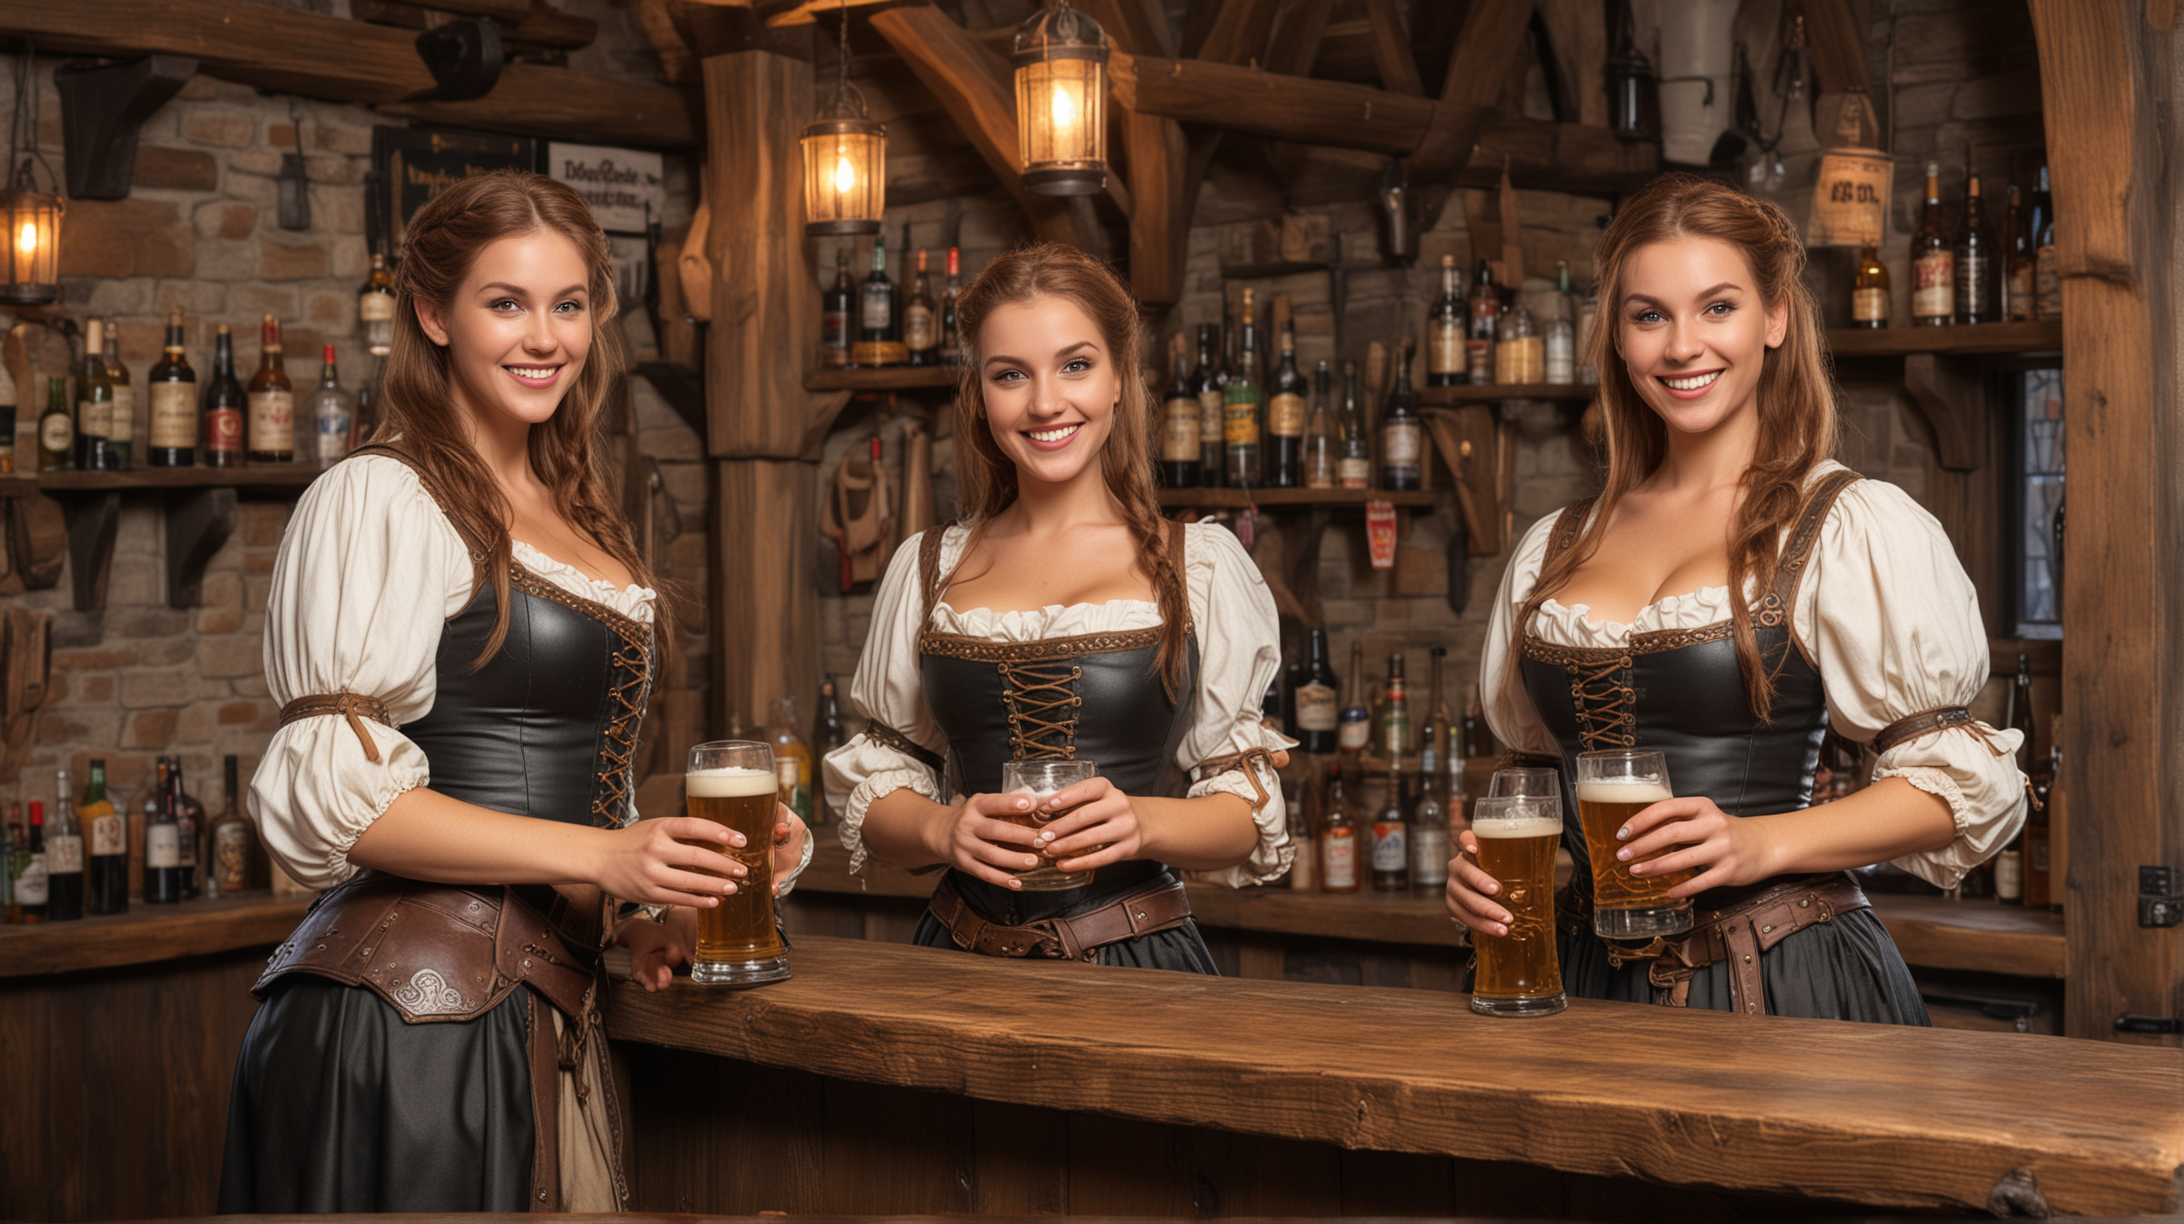 medieval bar with two happy bar wenches in skimpy clothes serving adventurers beer